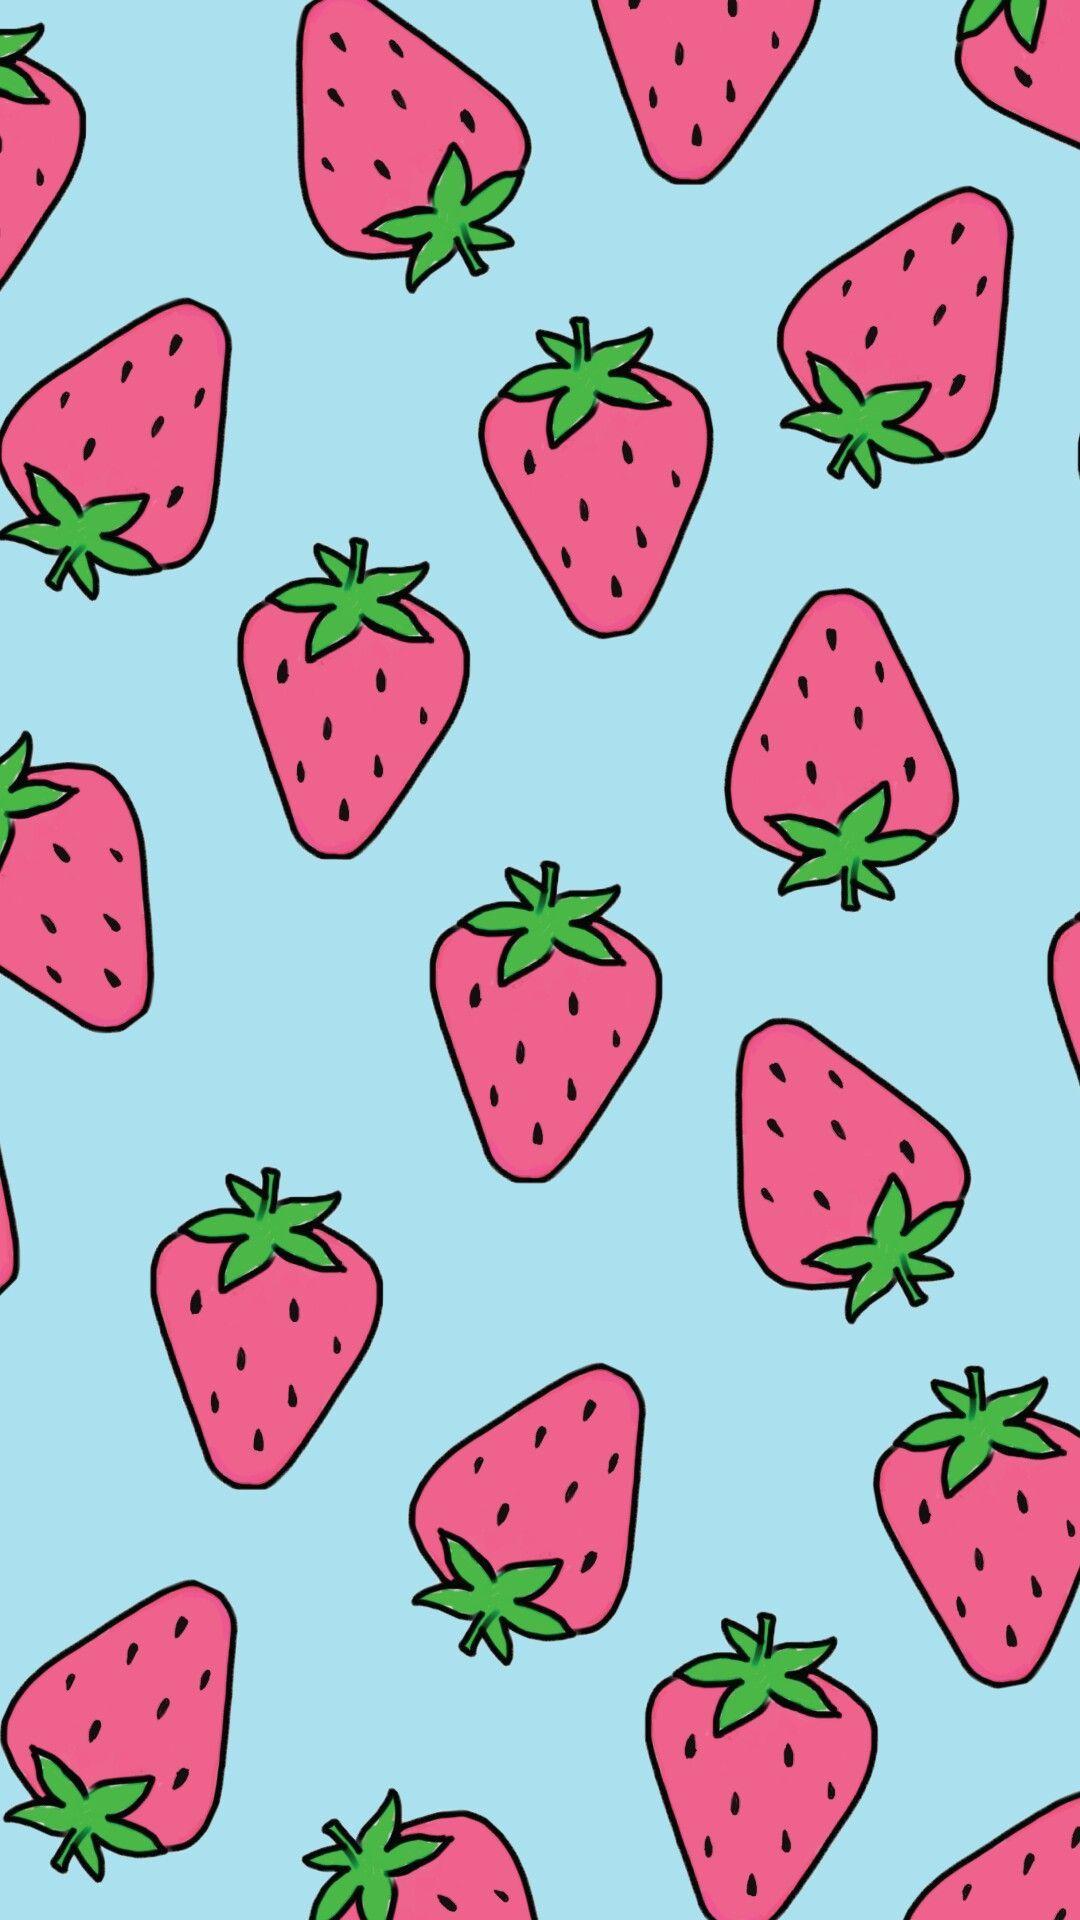 Wallpaper White Strawberry Background Wallpaper Image For Free Download   Pngtree